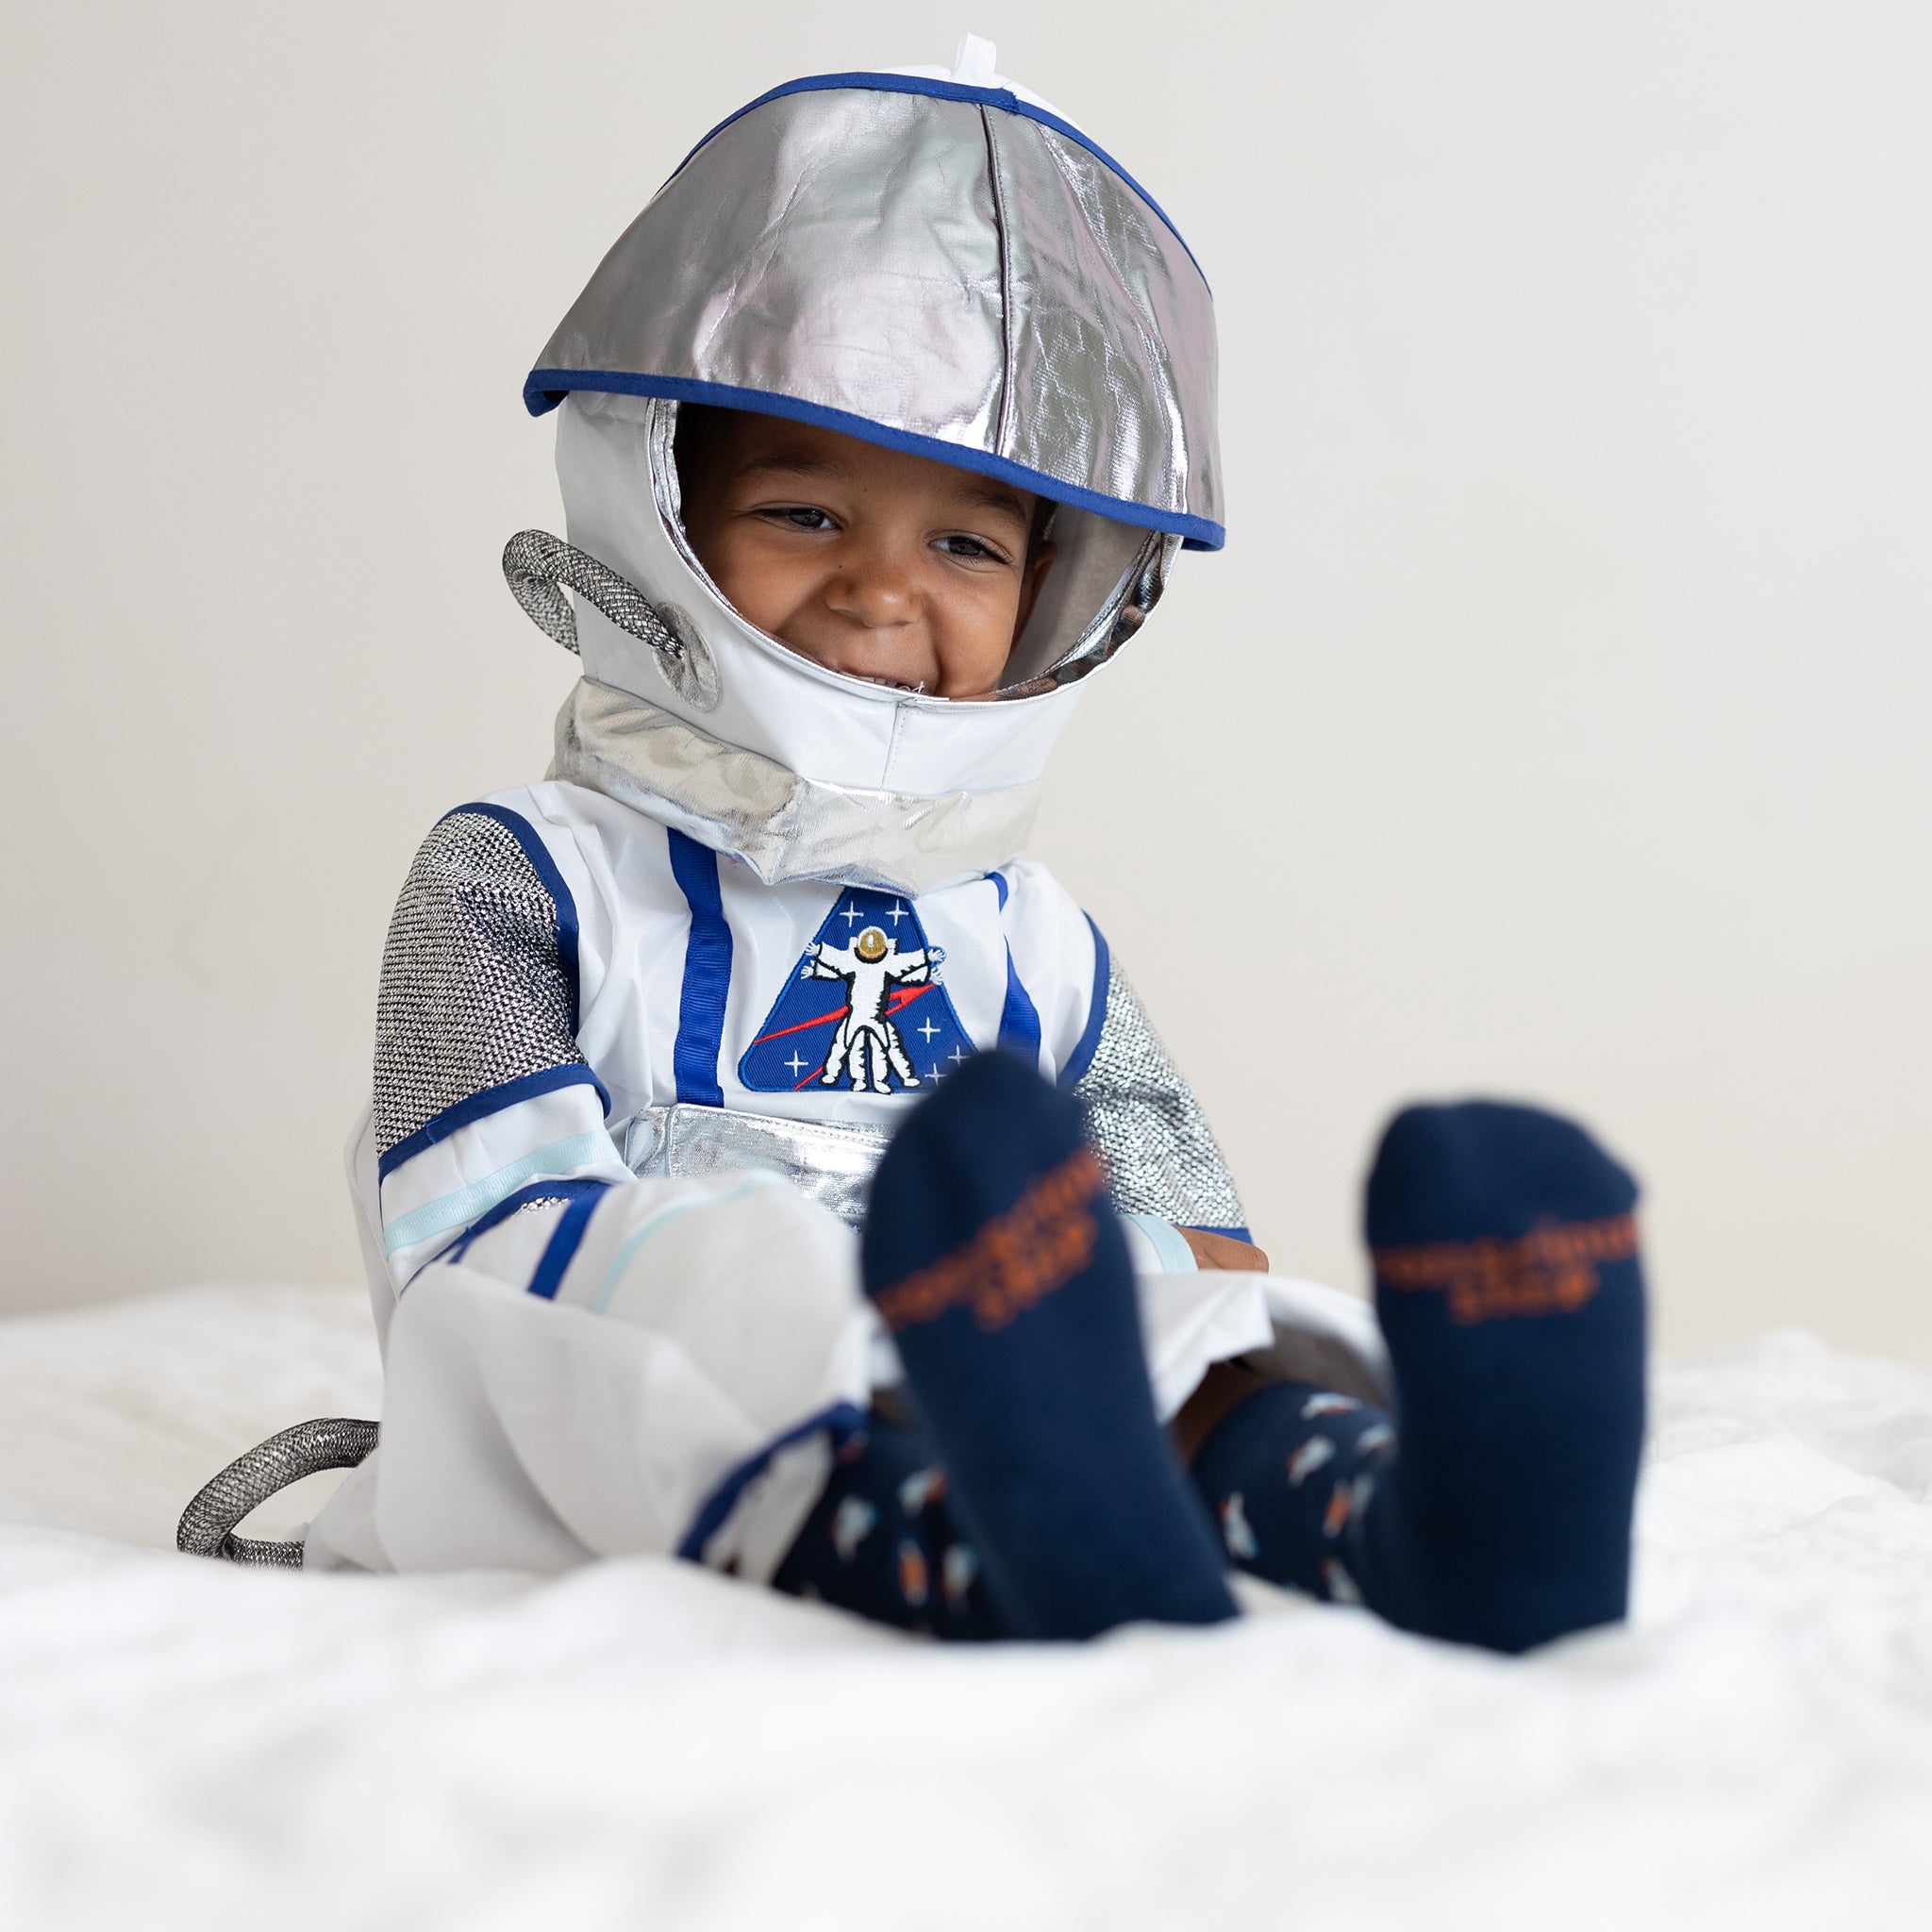 Kids Socks that Support Space Exploration